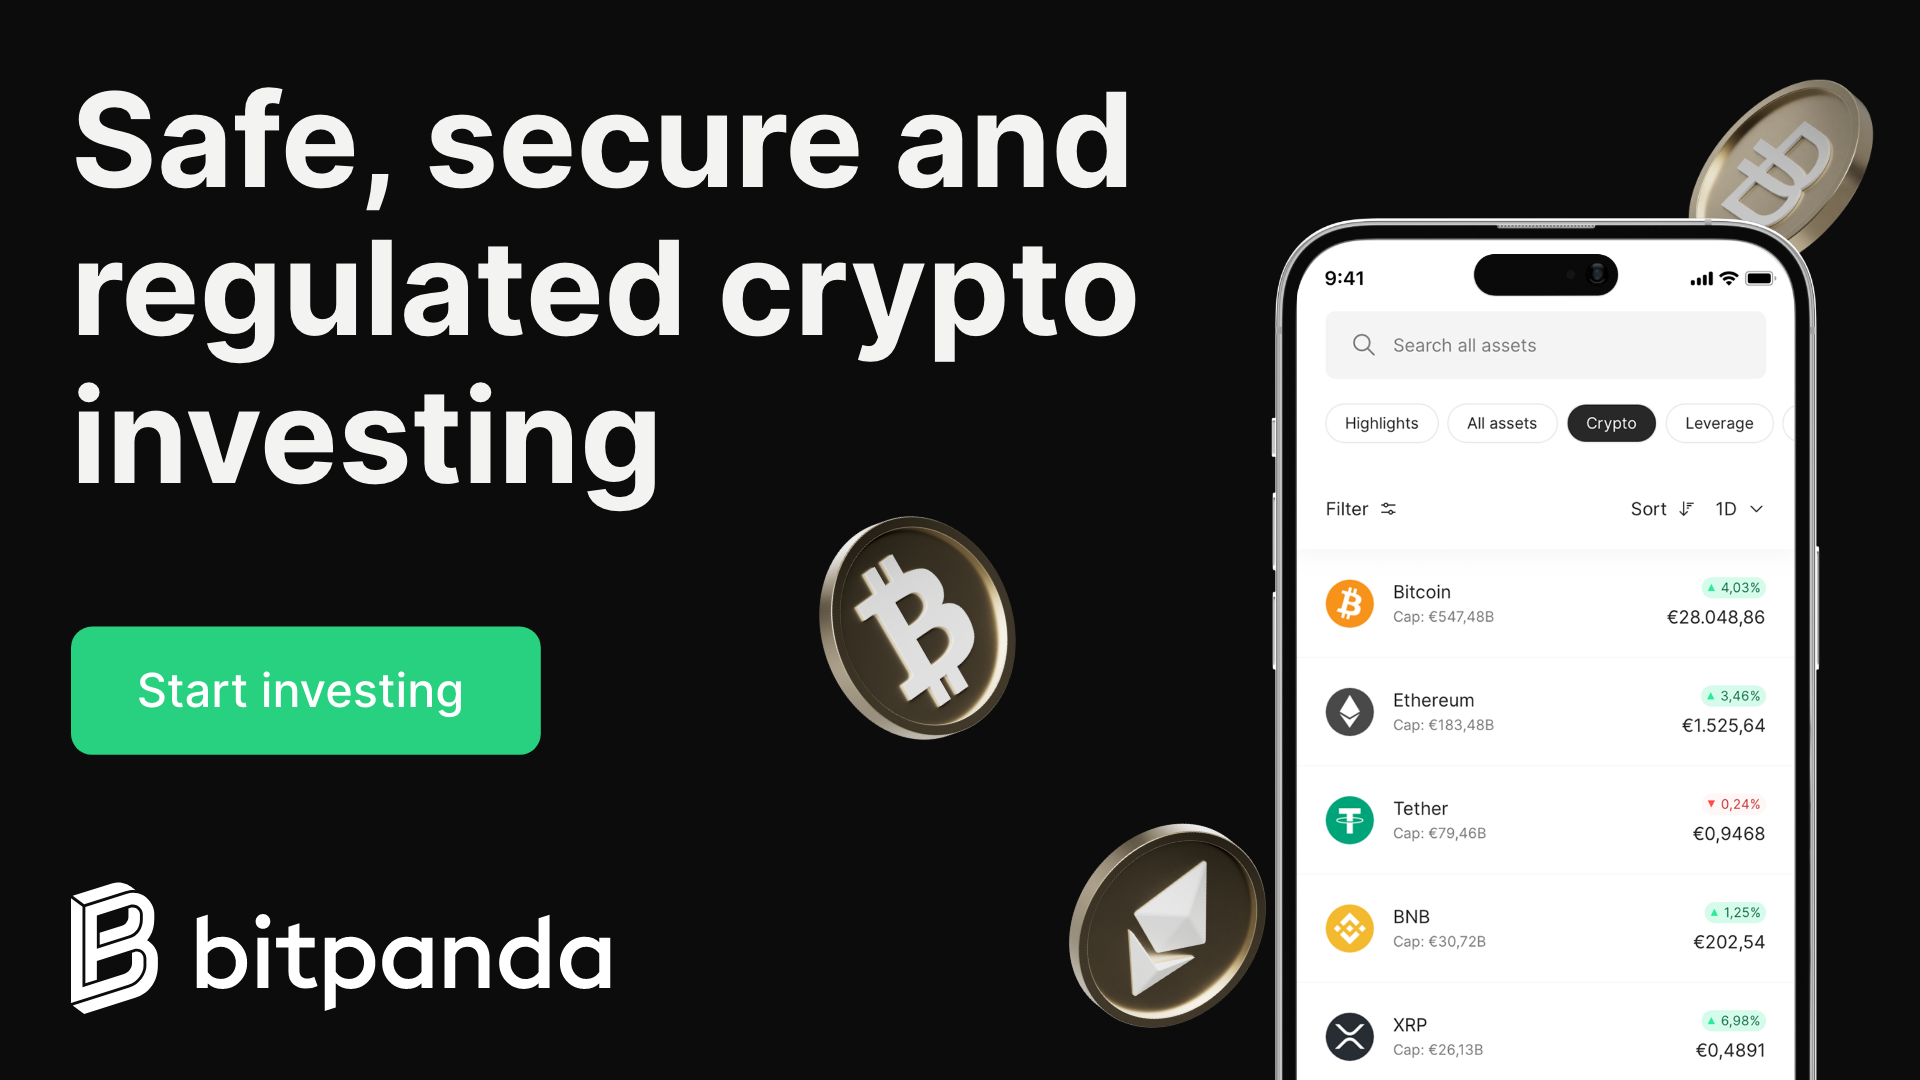 Bitpanda Broker: A Secure and Easy Way to Invest